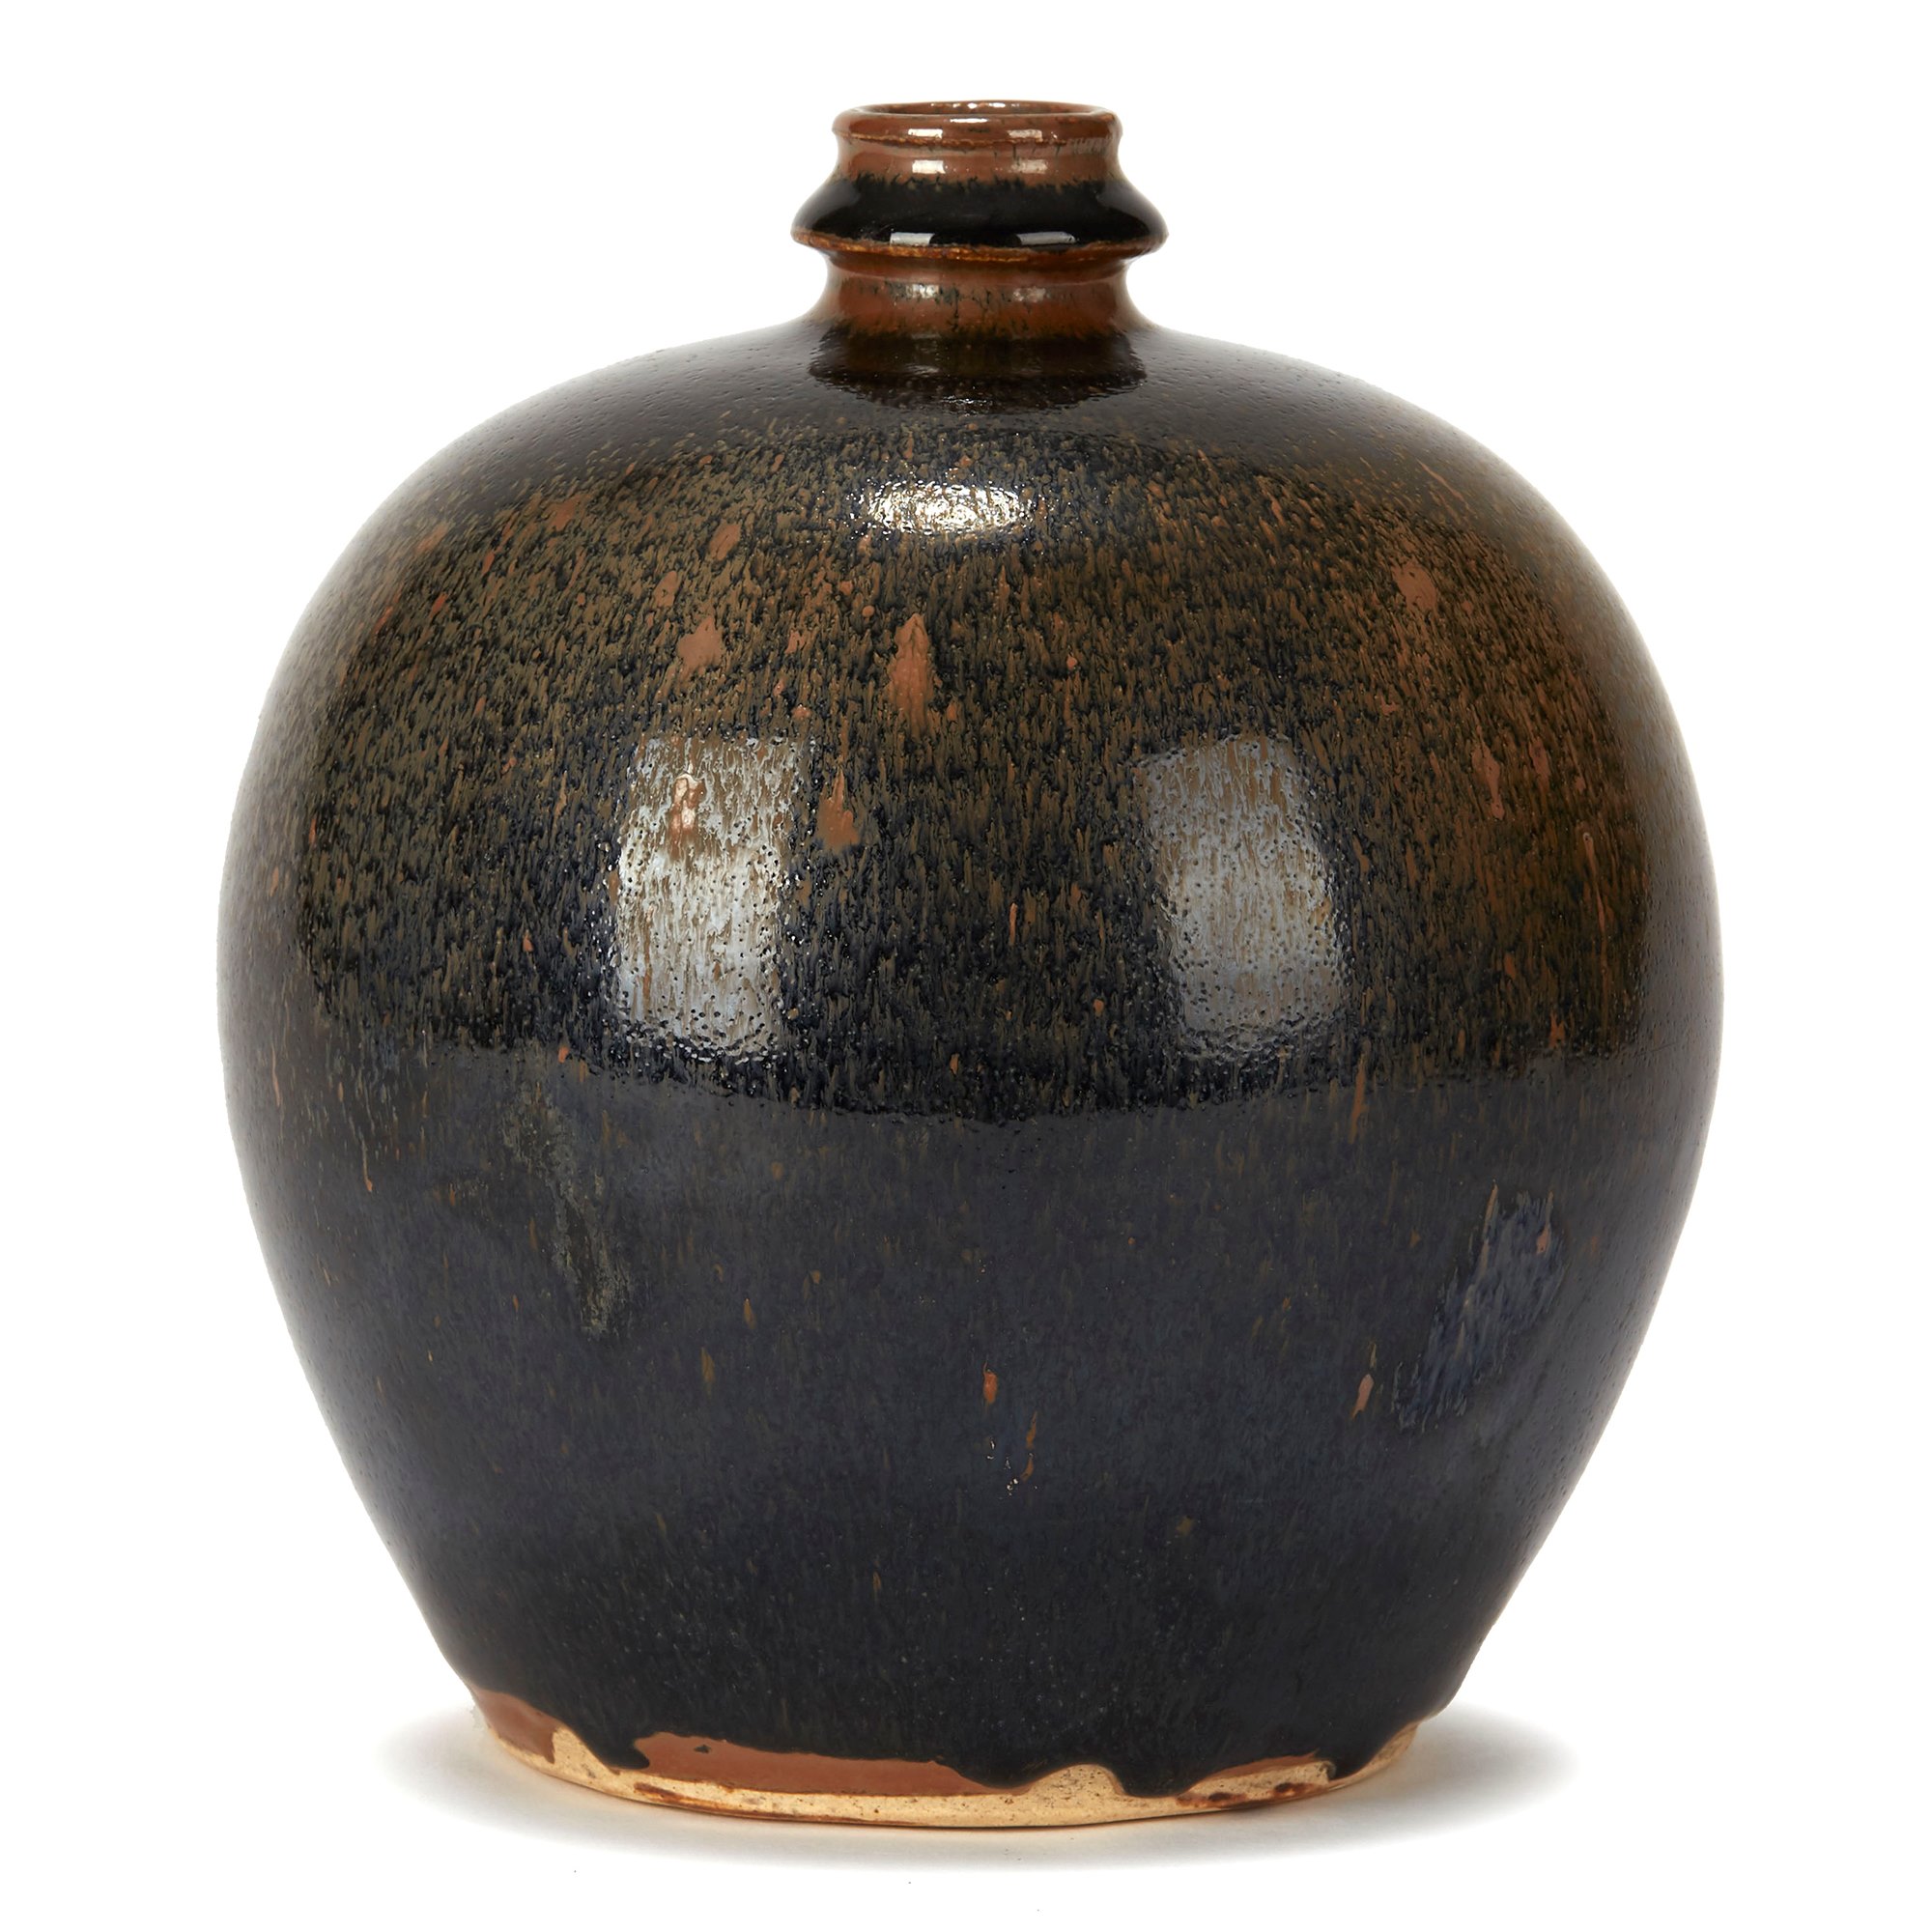 CHINESE BLACK & BROWN HARESFUR GLAZED BULBOUS POTTERY VASE Song style, 20th Century or possibly earlier